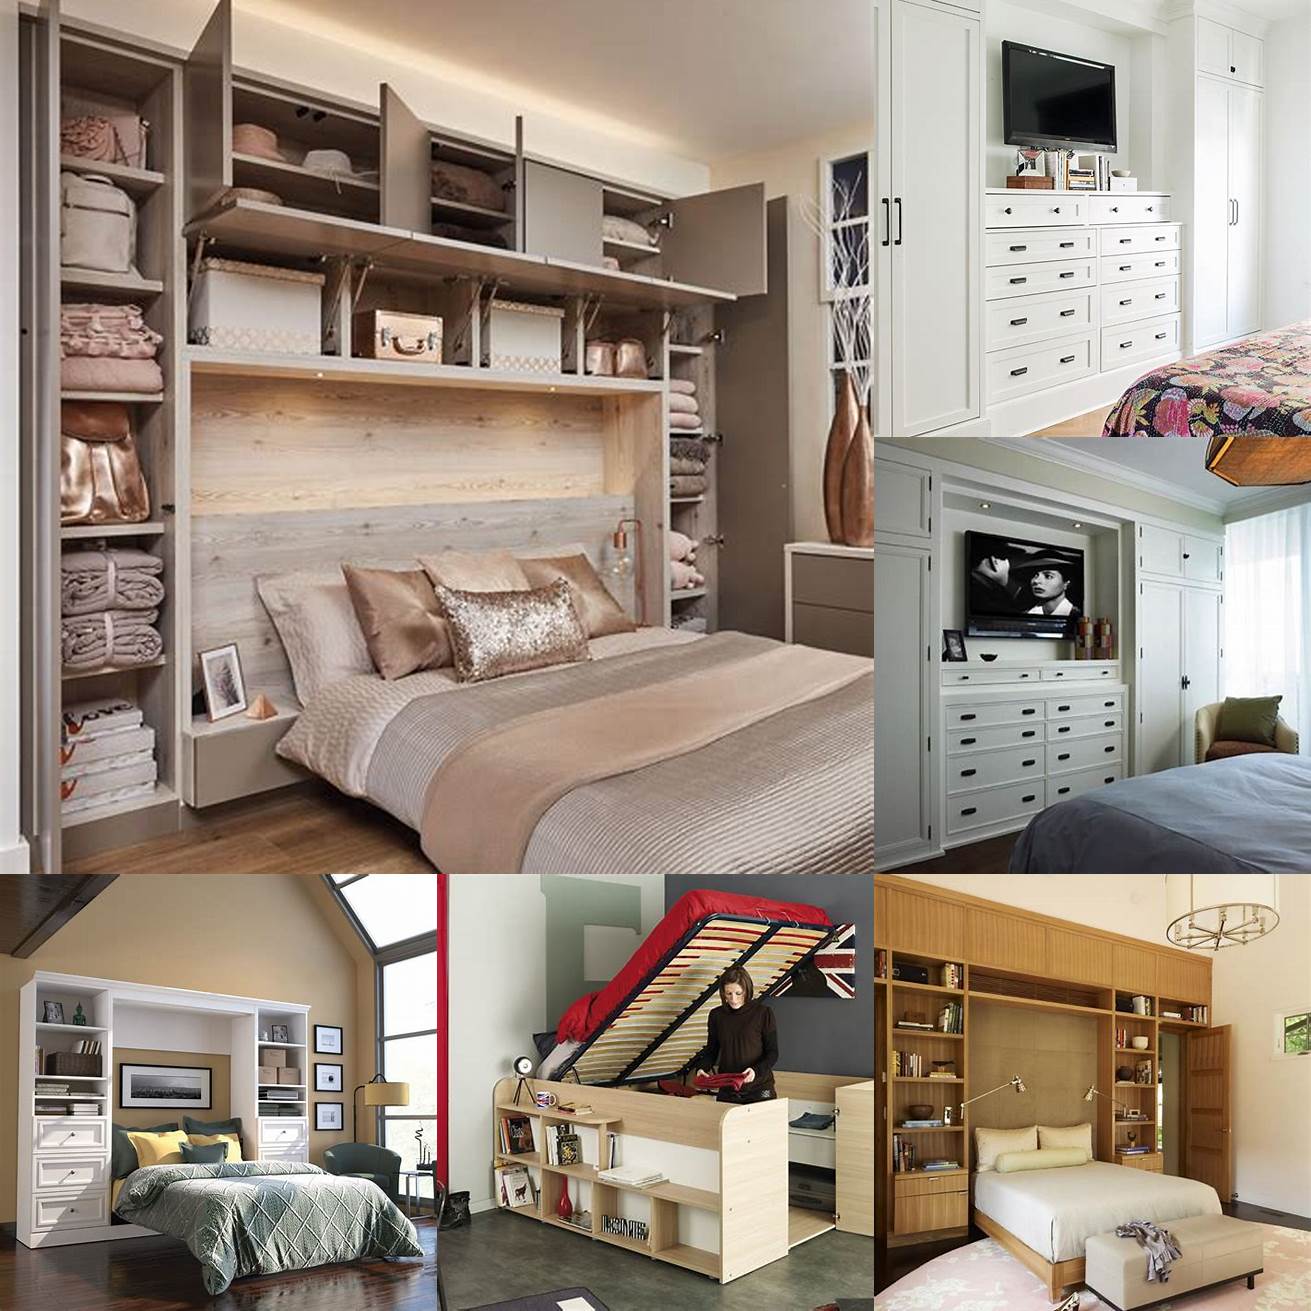 A storage bedroom double with built-in drawers and shelves for extra storage space